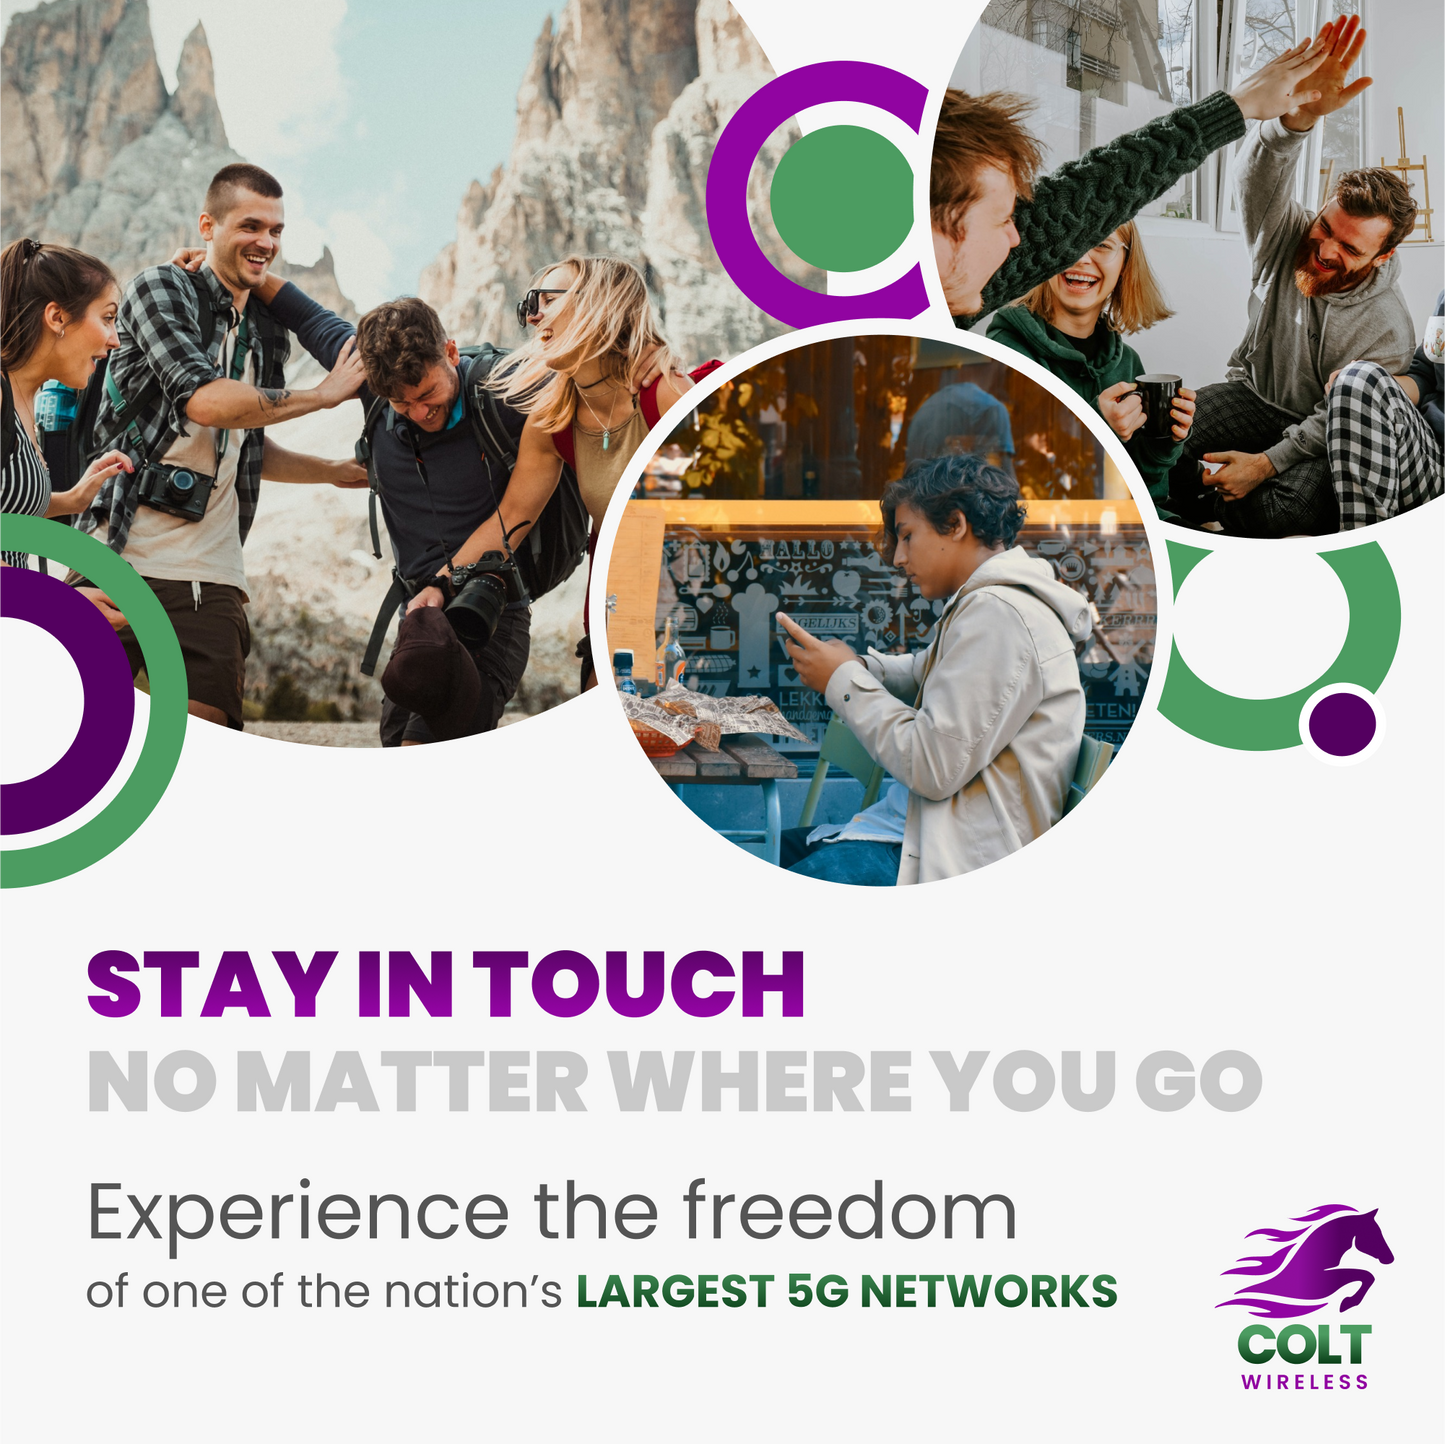 Colt Wireless Plans - All Plans Come With Unlimited Talk Text and Data Within the U.S. and to 90+ Countries